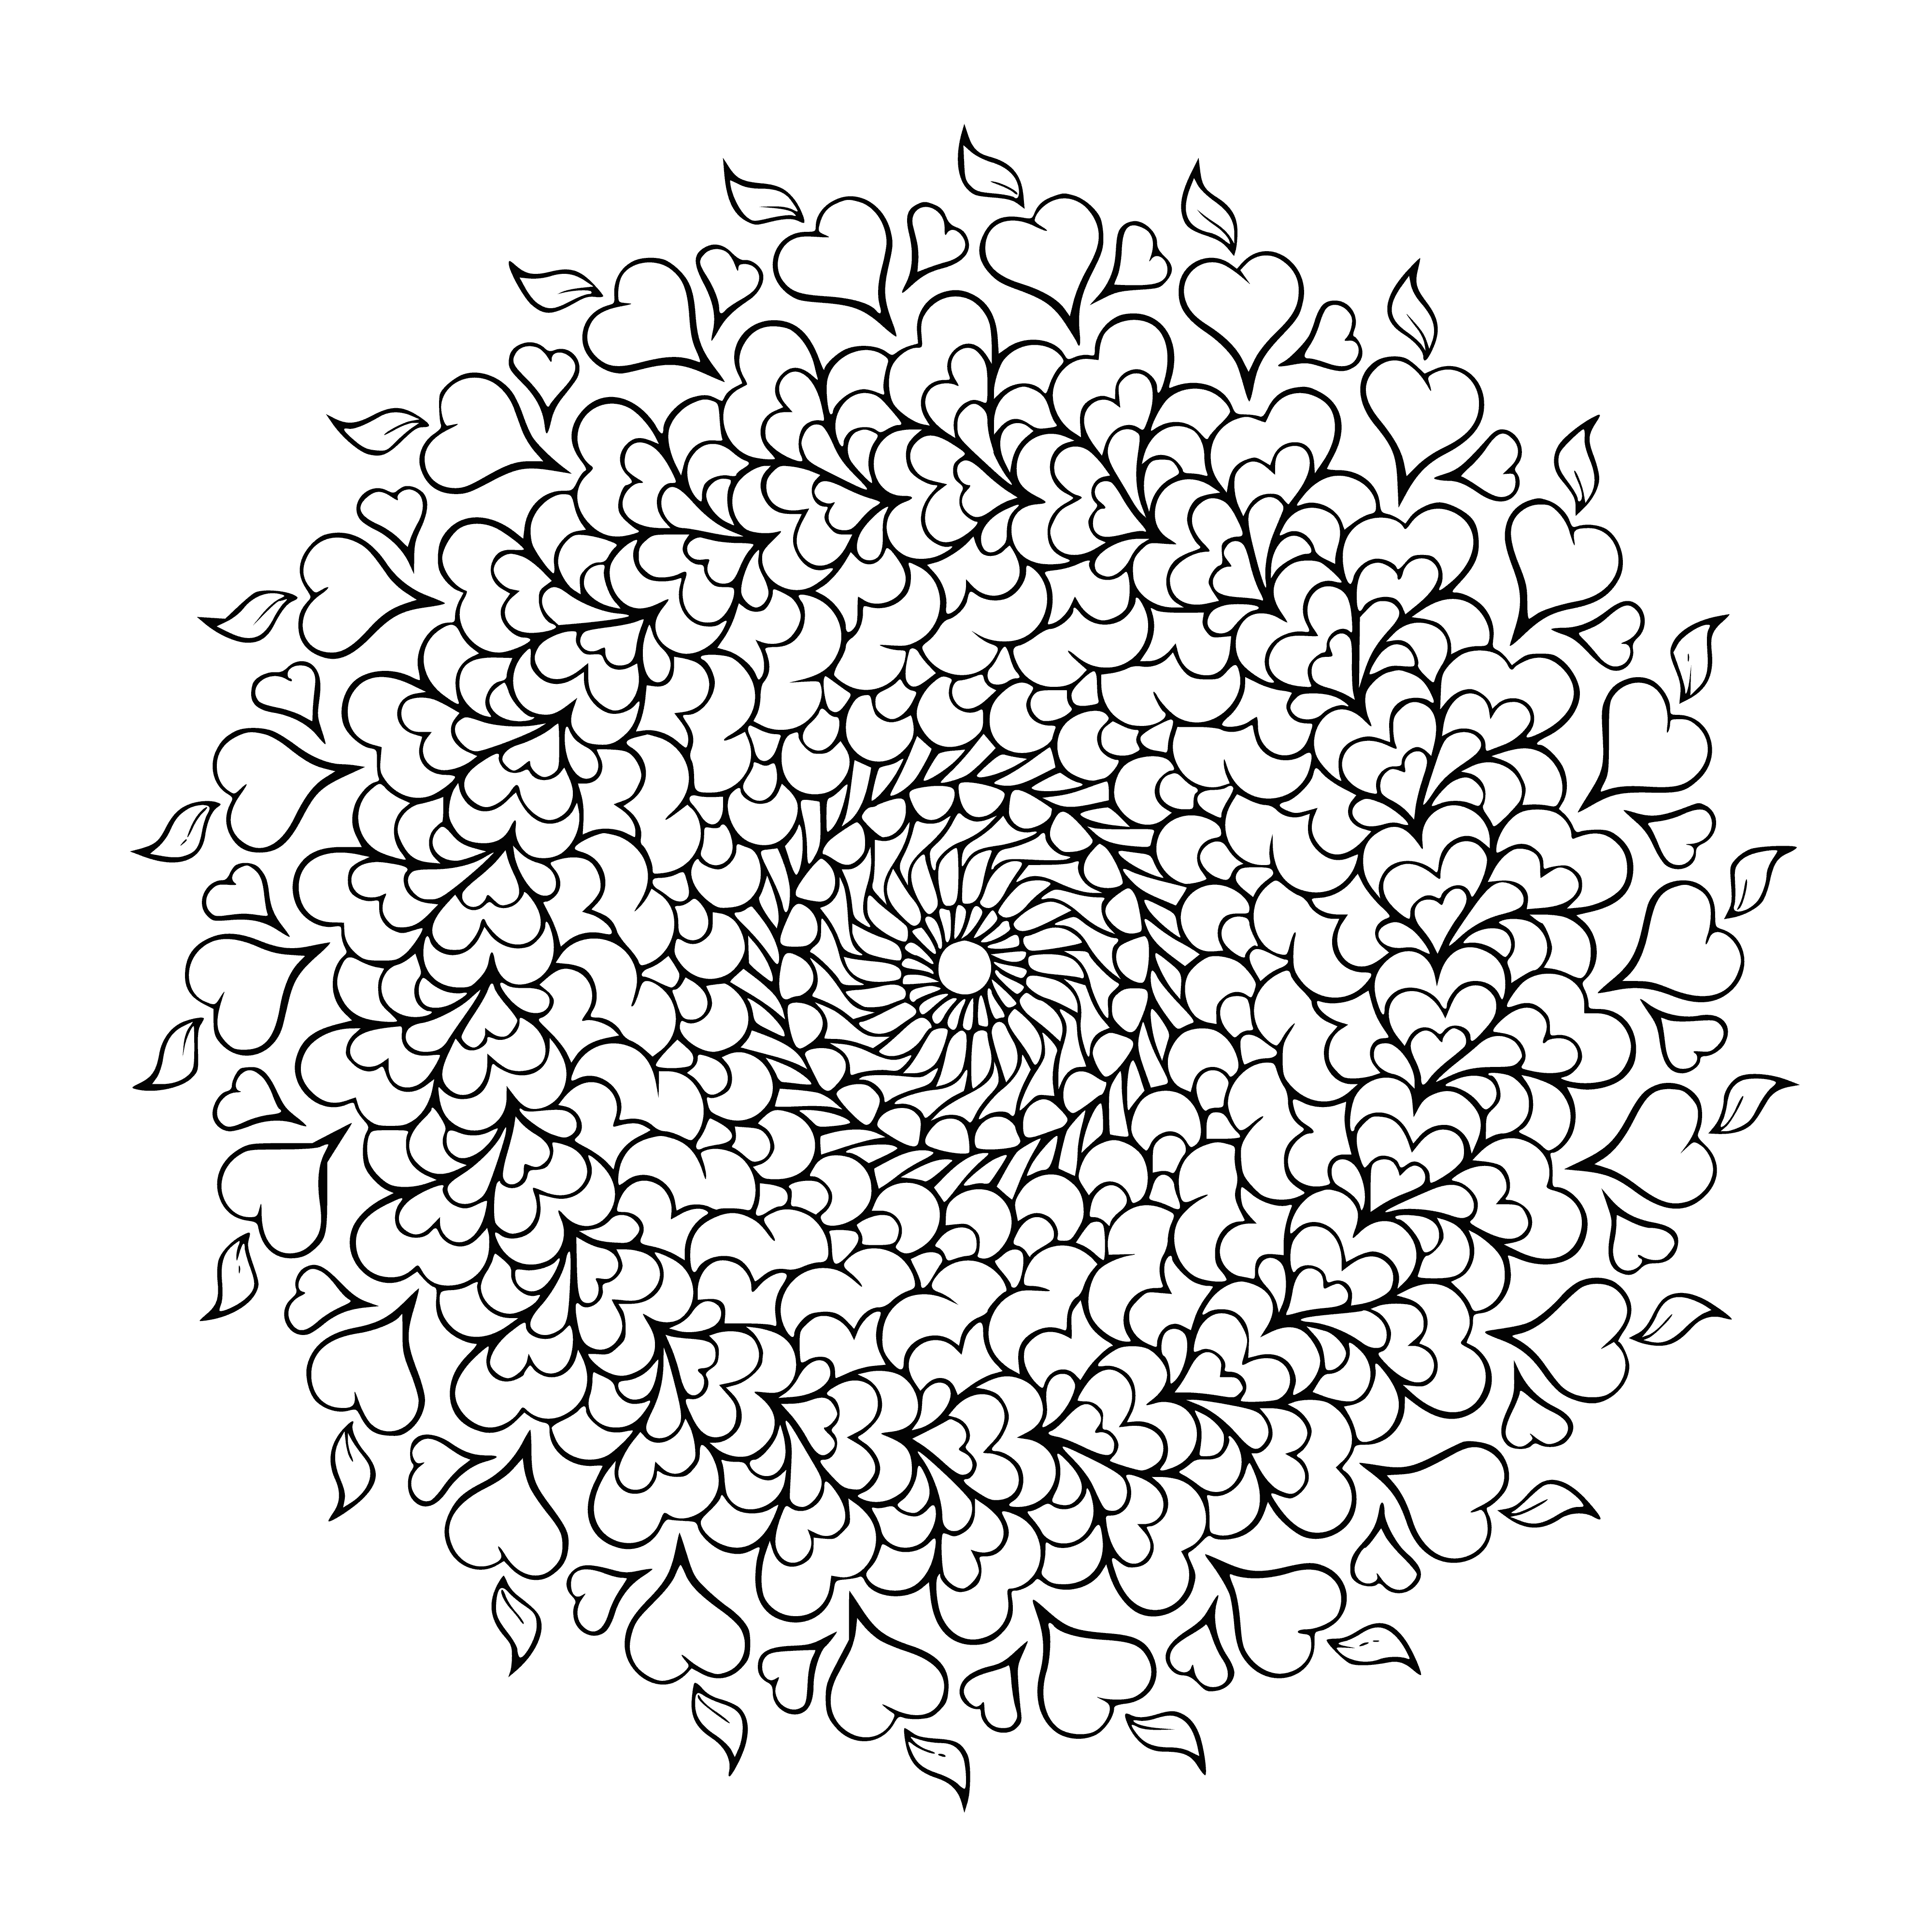 coloring page: 140 characters: Intricate patterns in bright colors circle a large heart in this beautiful, calming mandala.